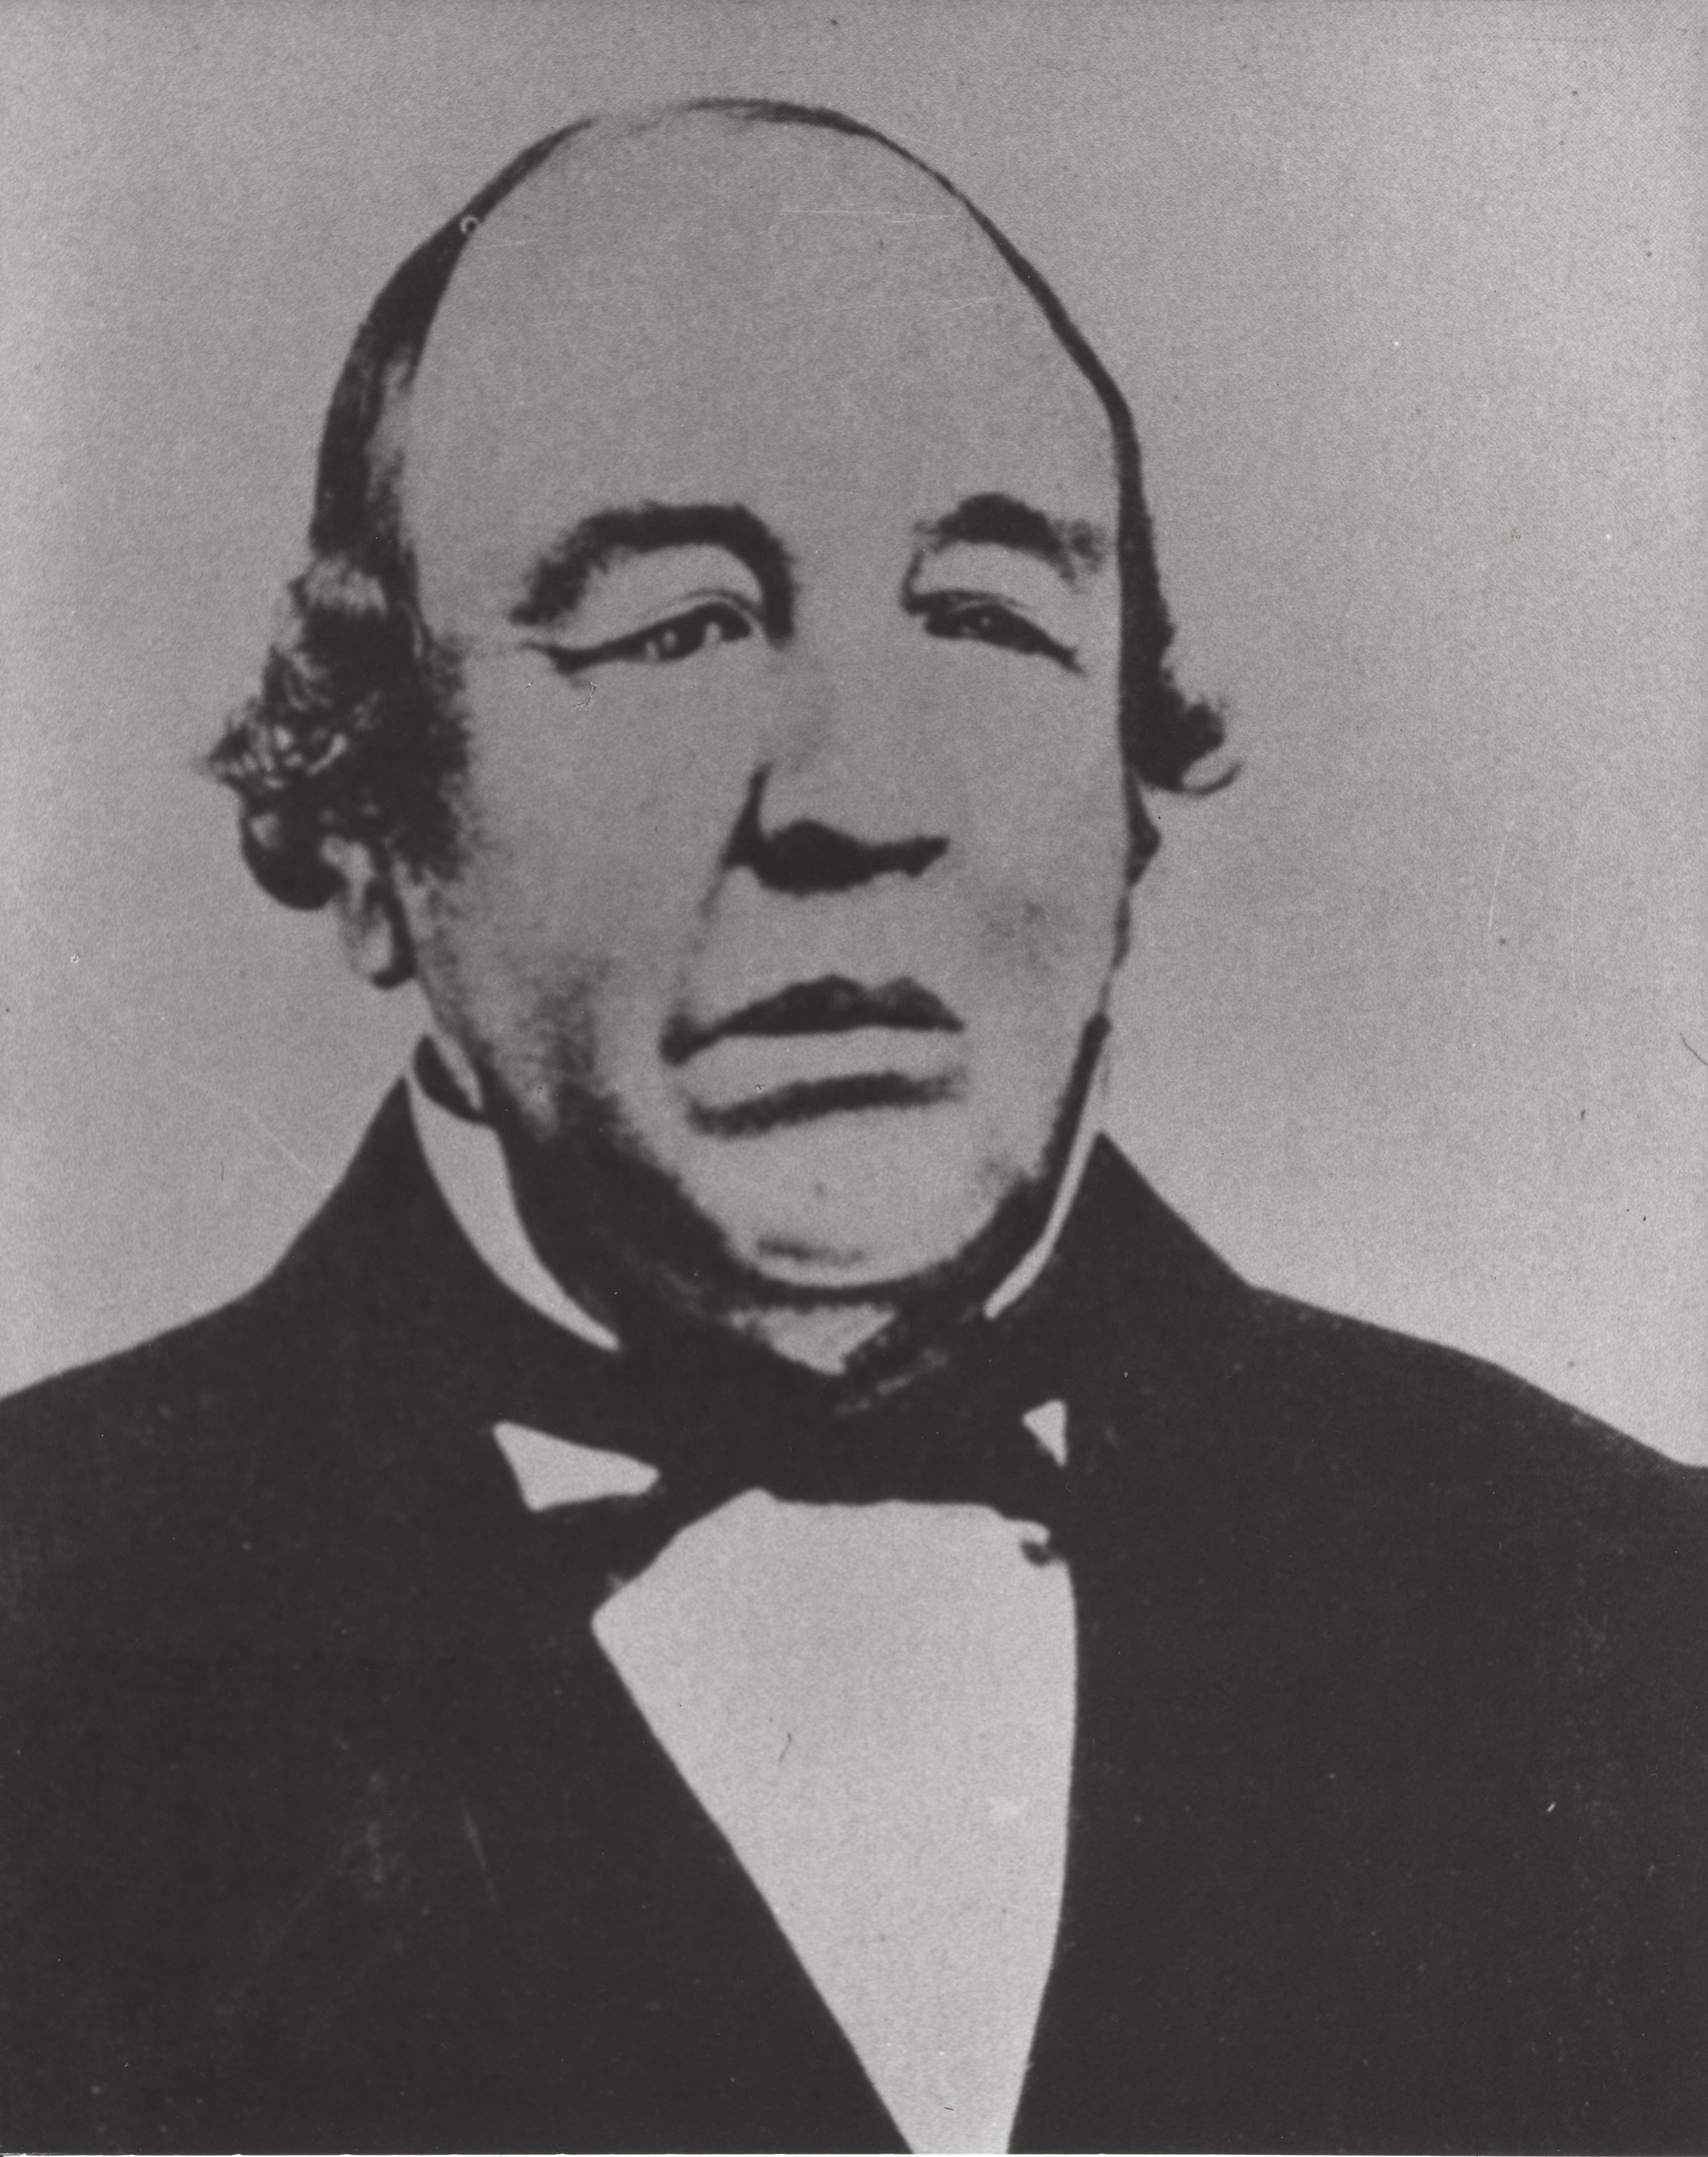 Black and white portrait of a man with long face in formal attire